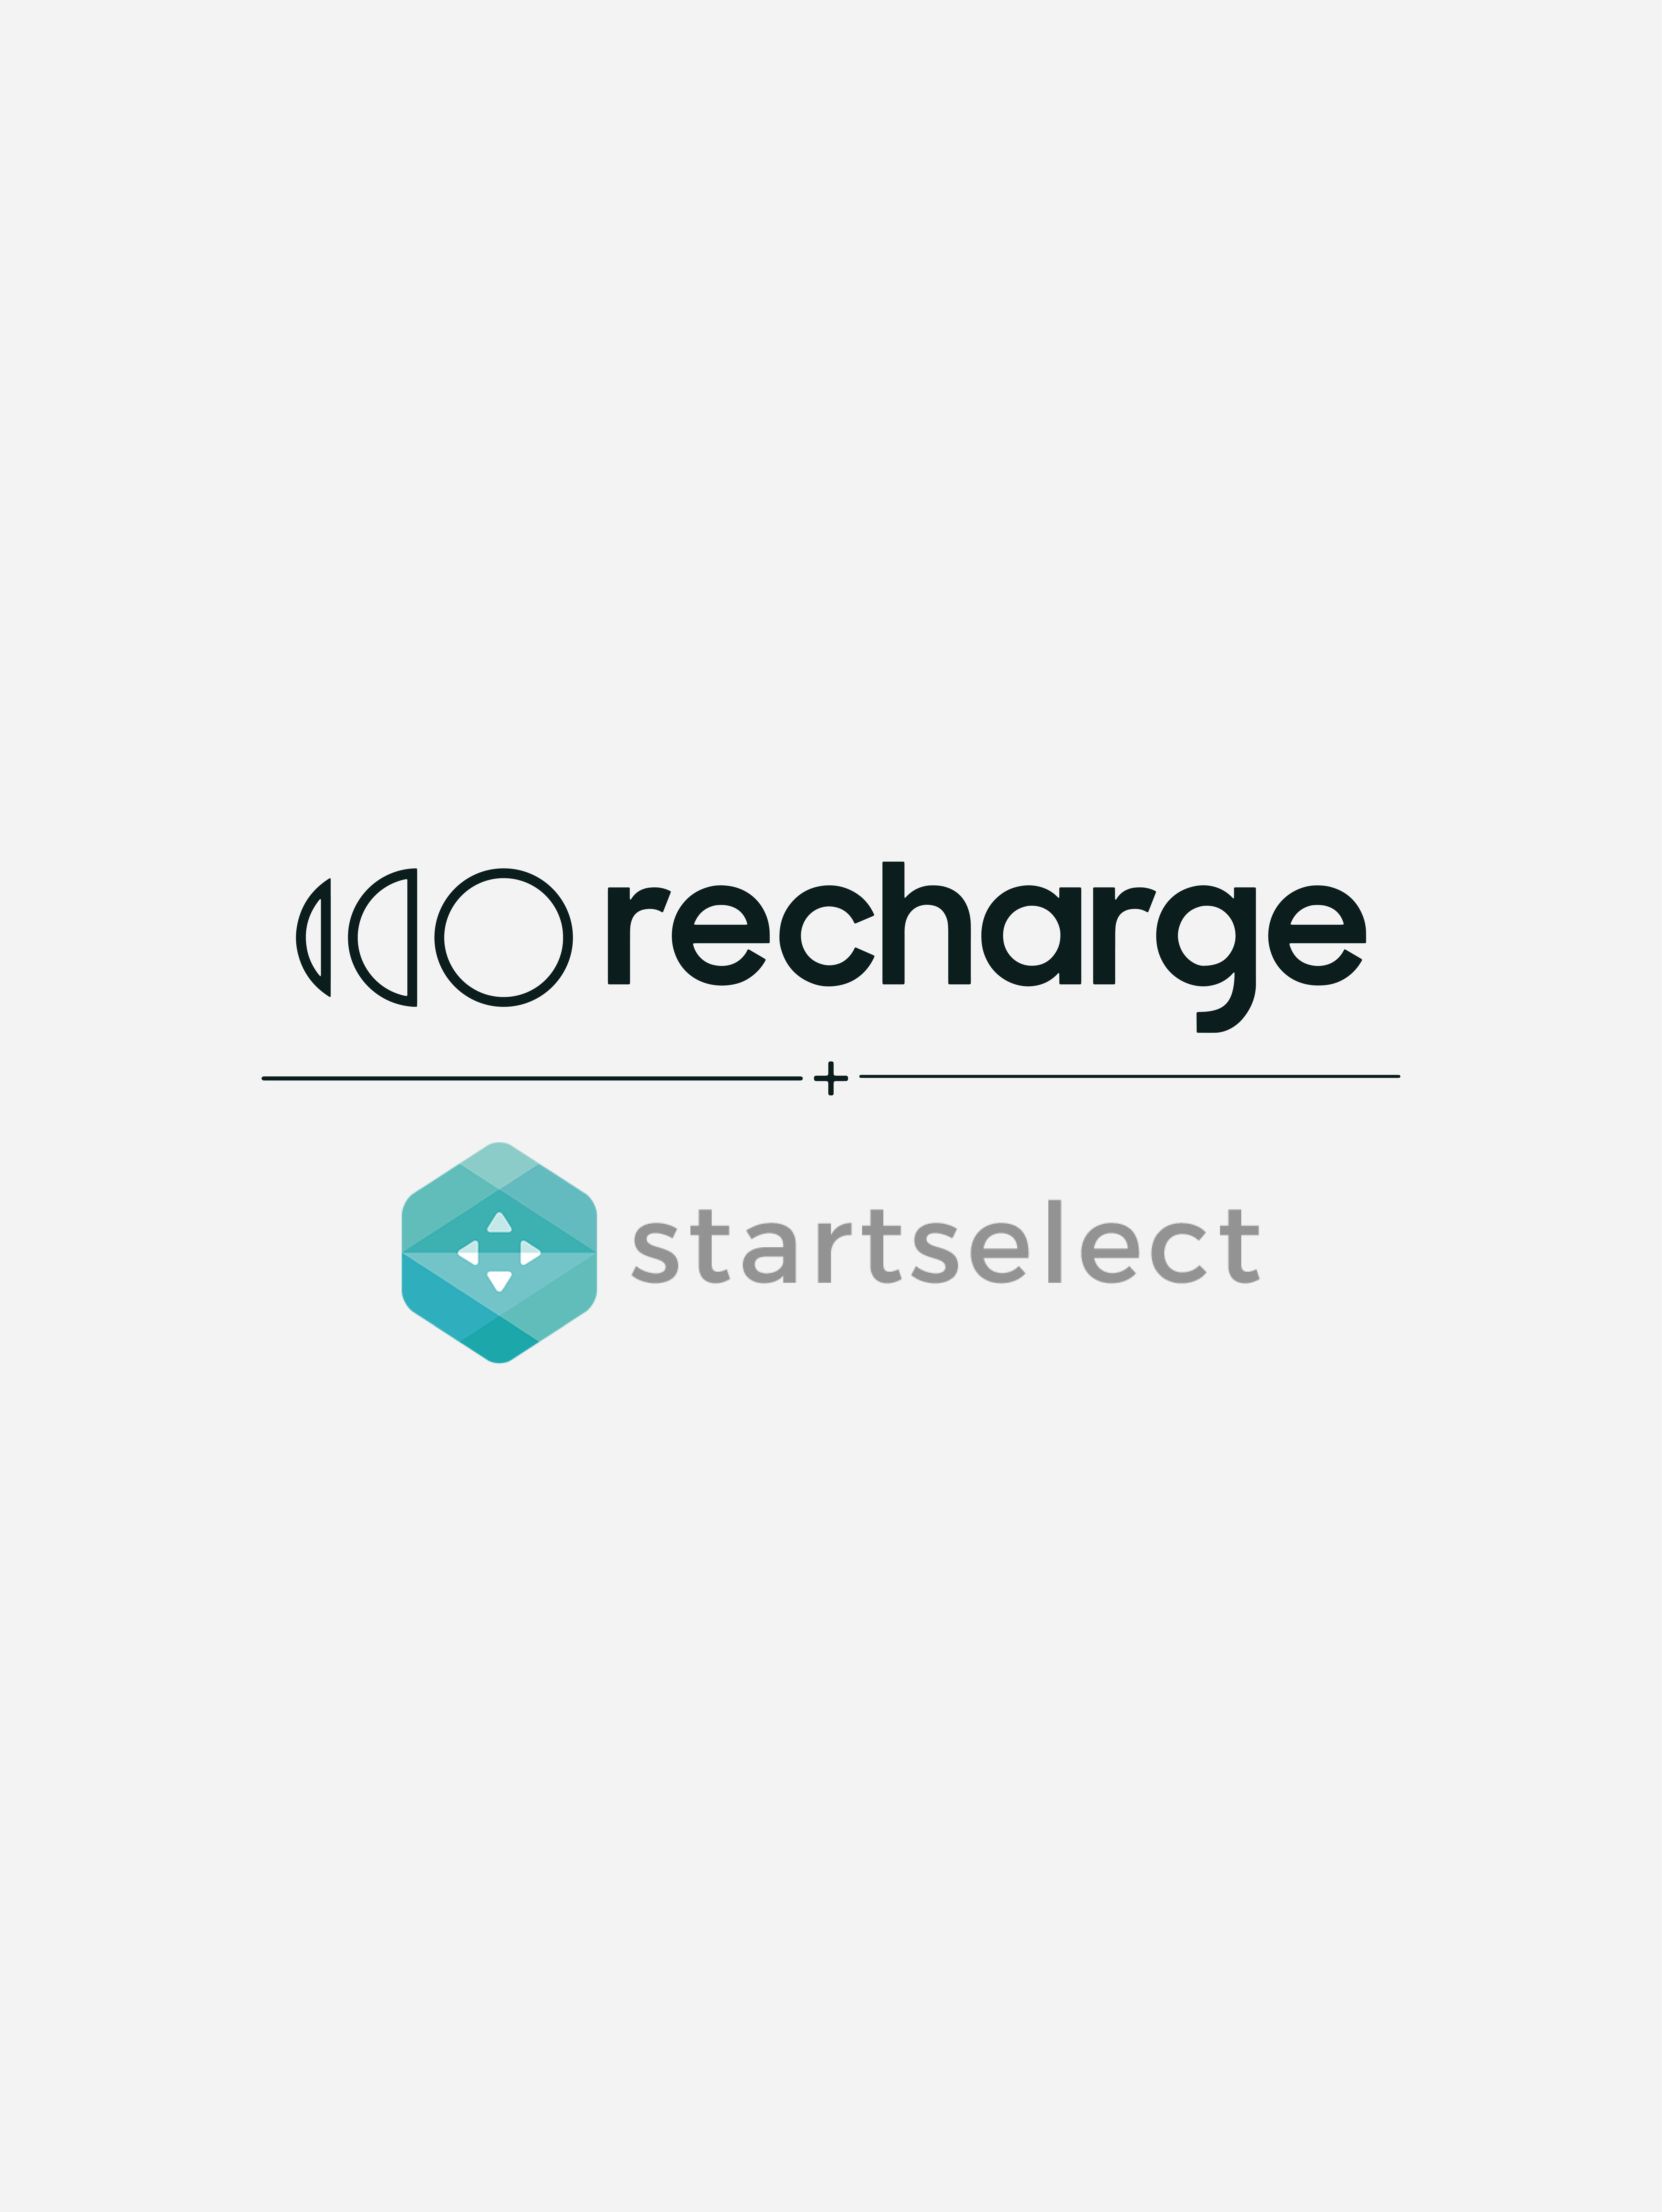 Recharge starts consolidation of the prepaid payments market